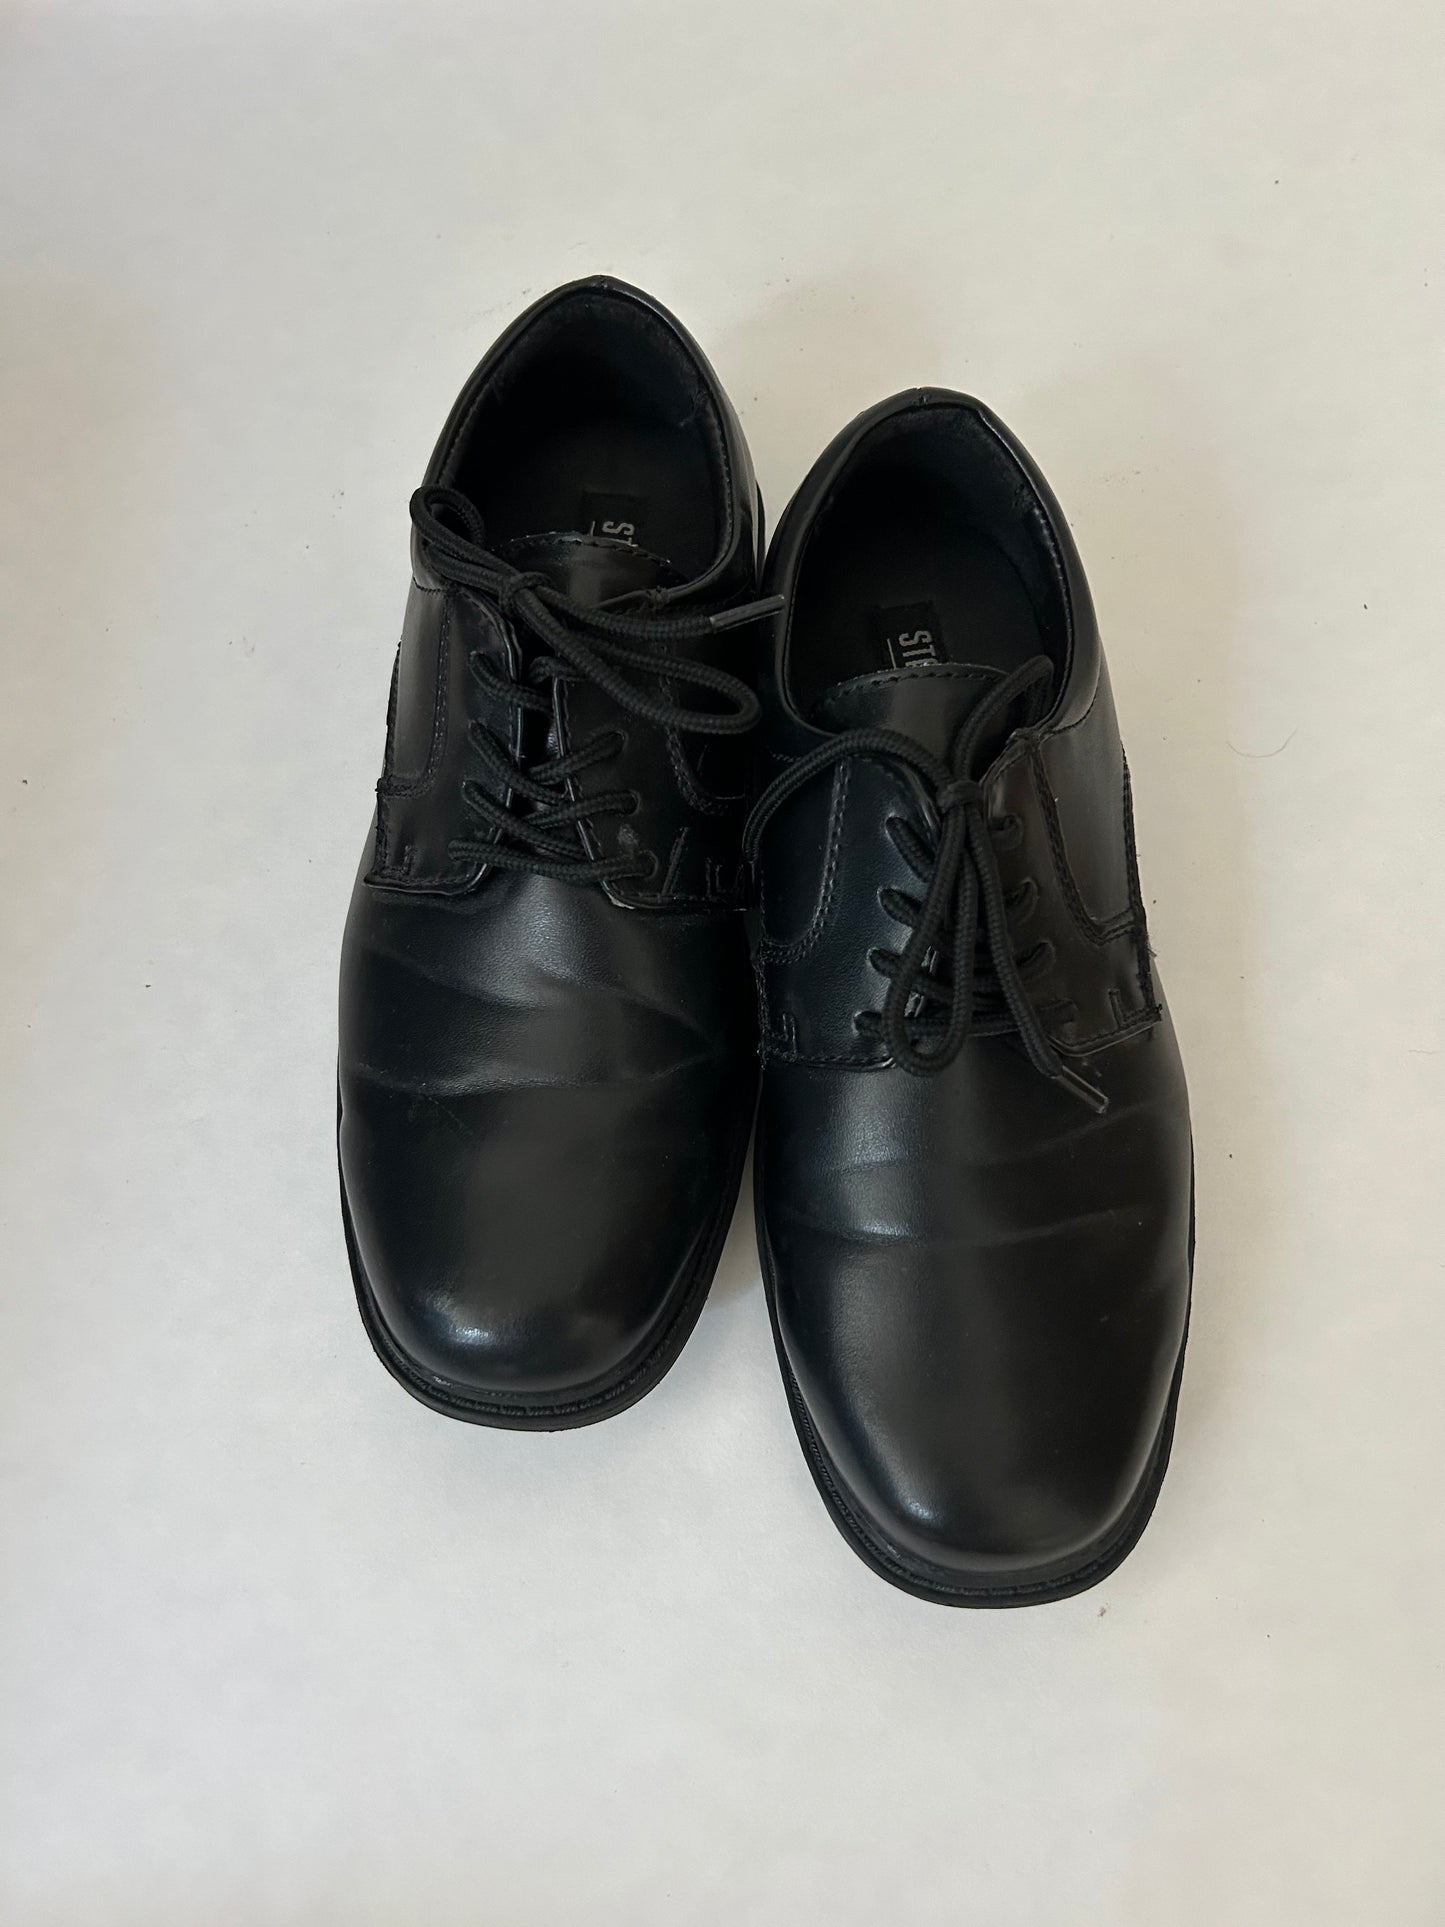 Big Boys size 3 black leather dress shoes with ties